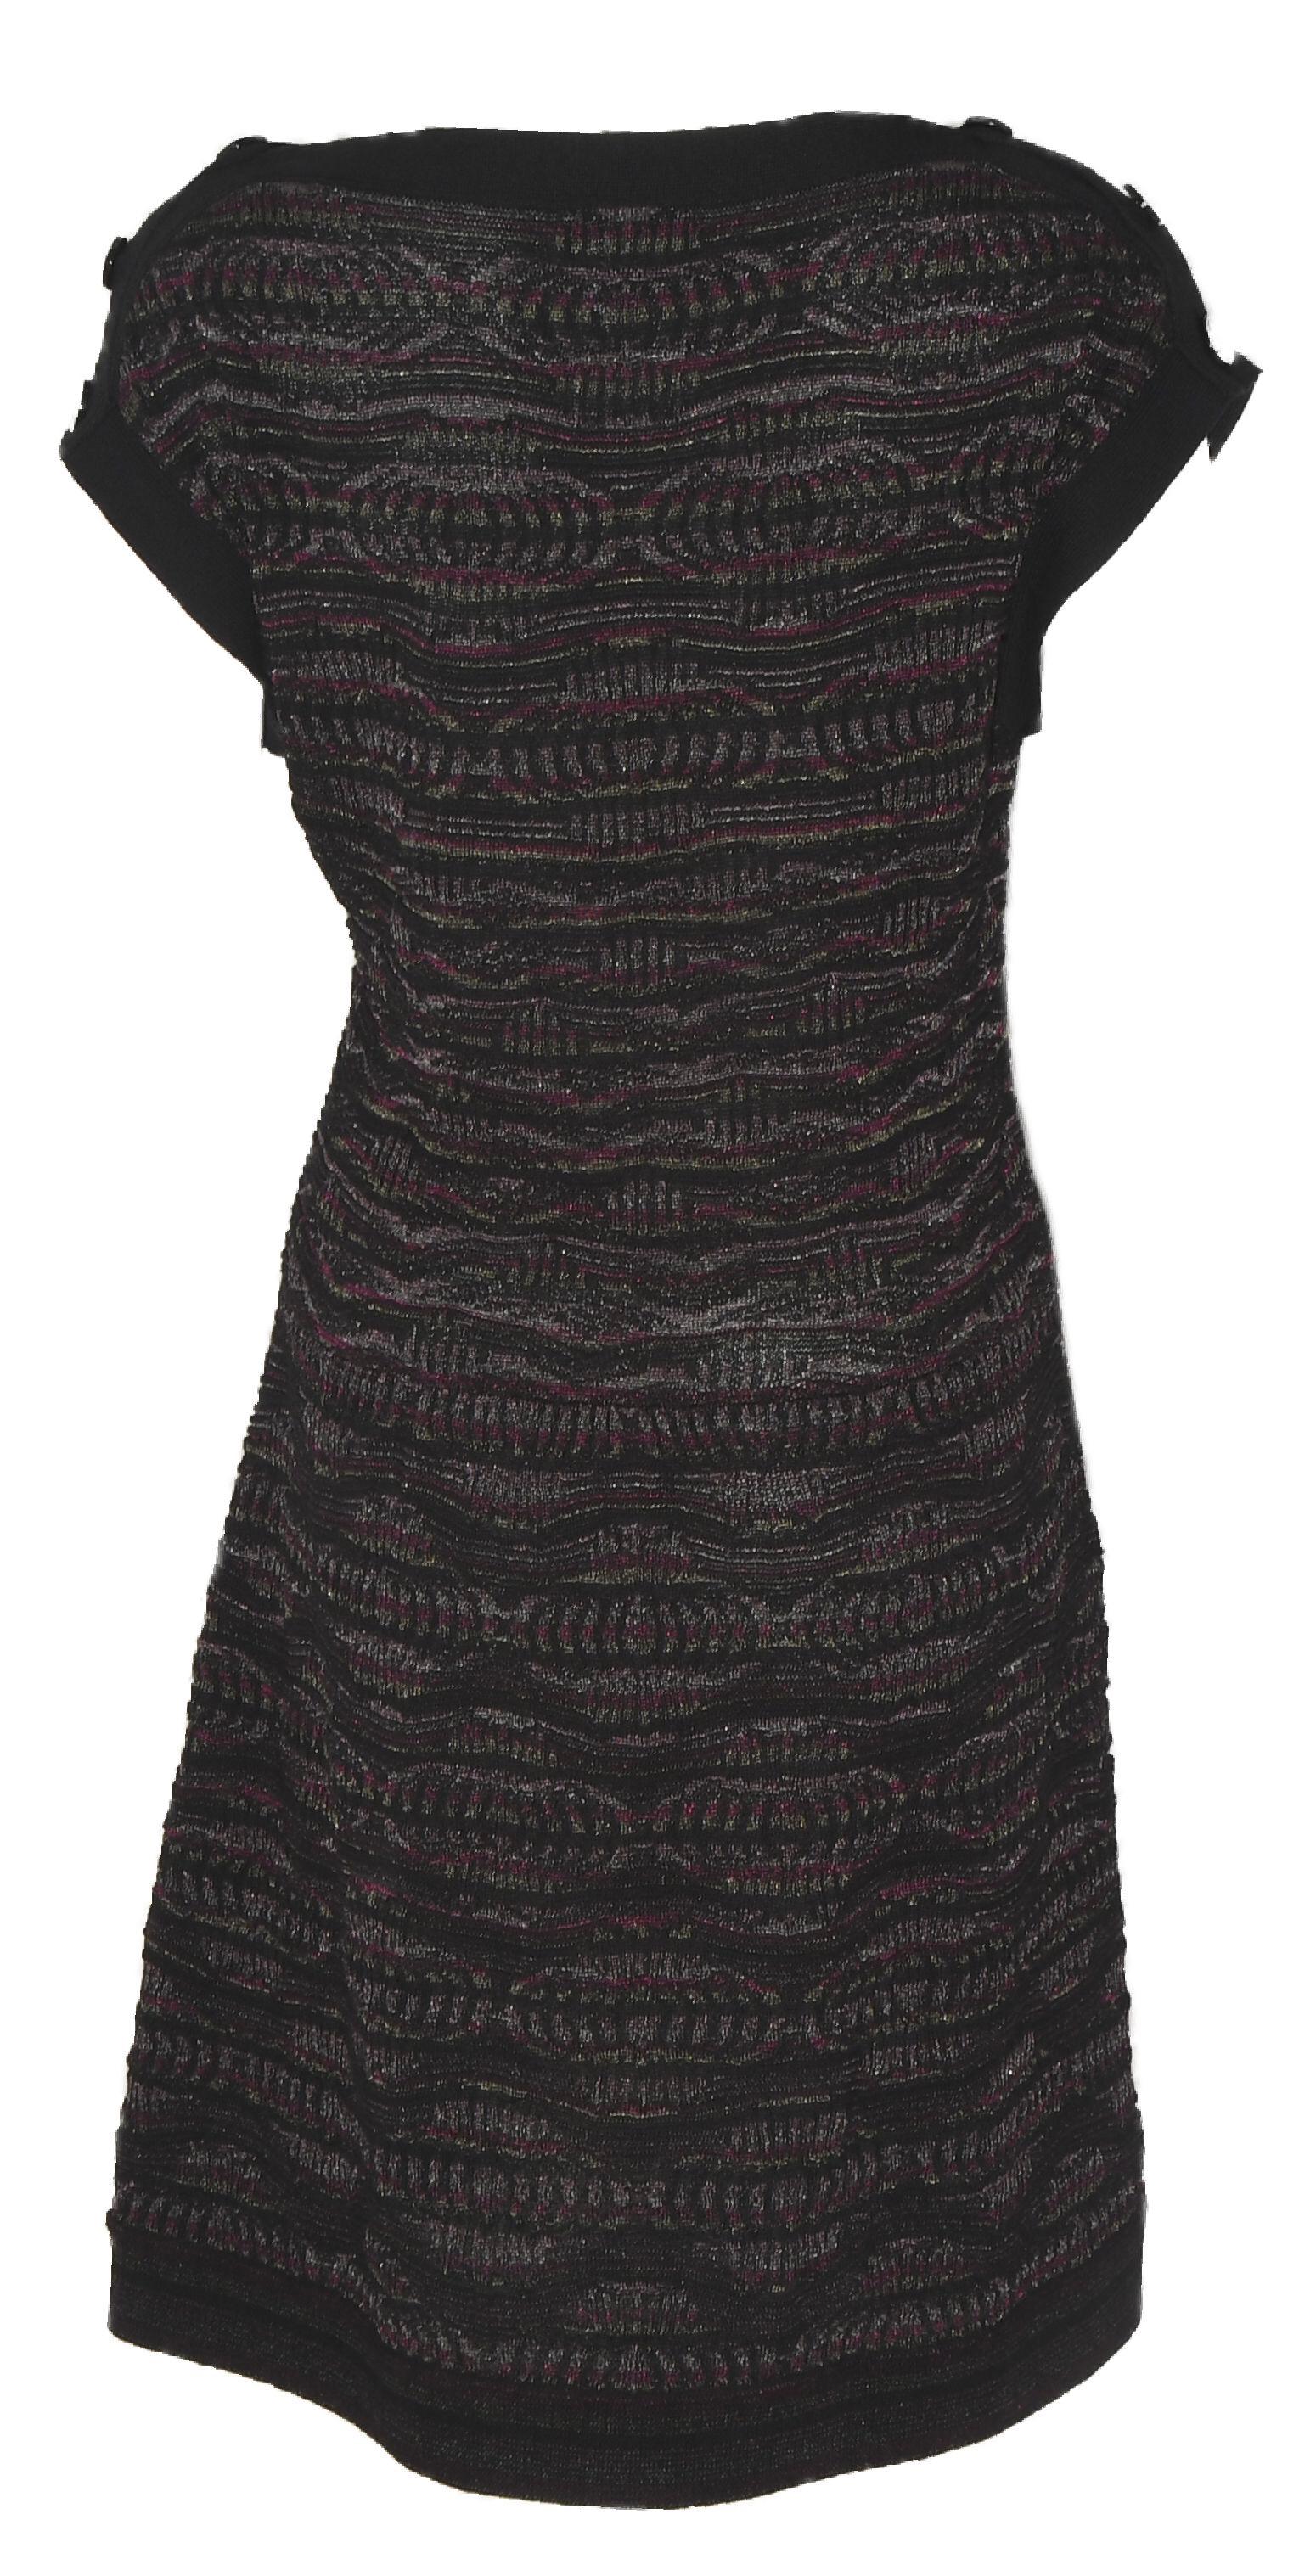 Chanel Textured Knit Dress Black/Purple/Silver Throughout  In Excellent Condition For Sale In Palm Beach, FL